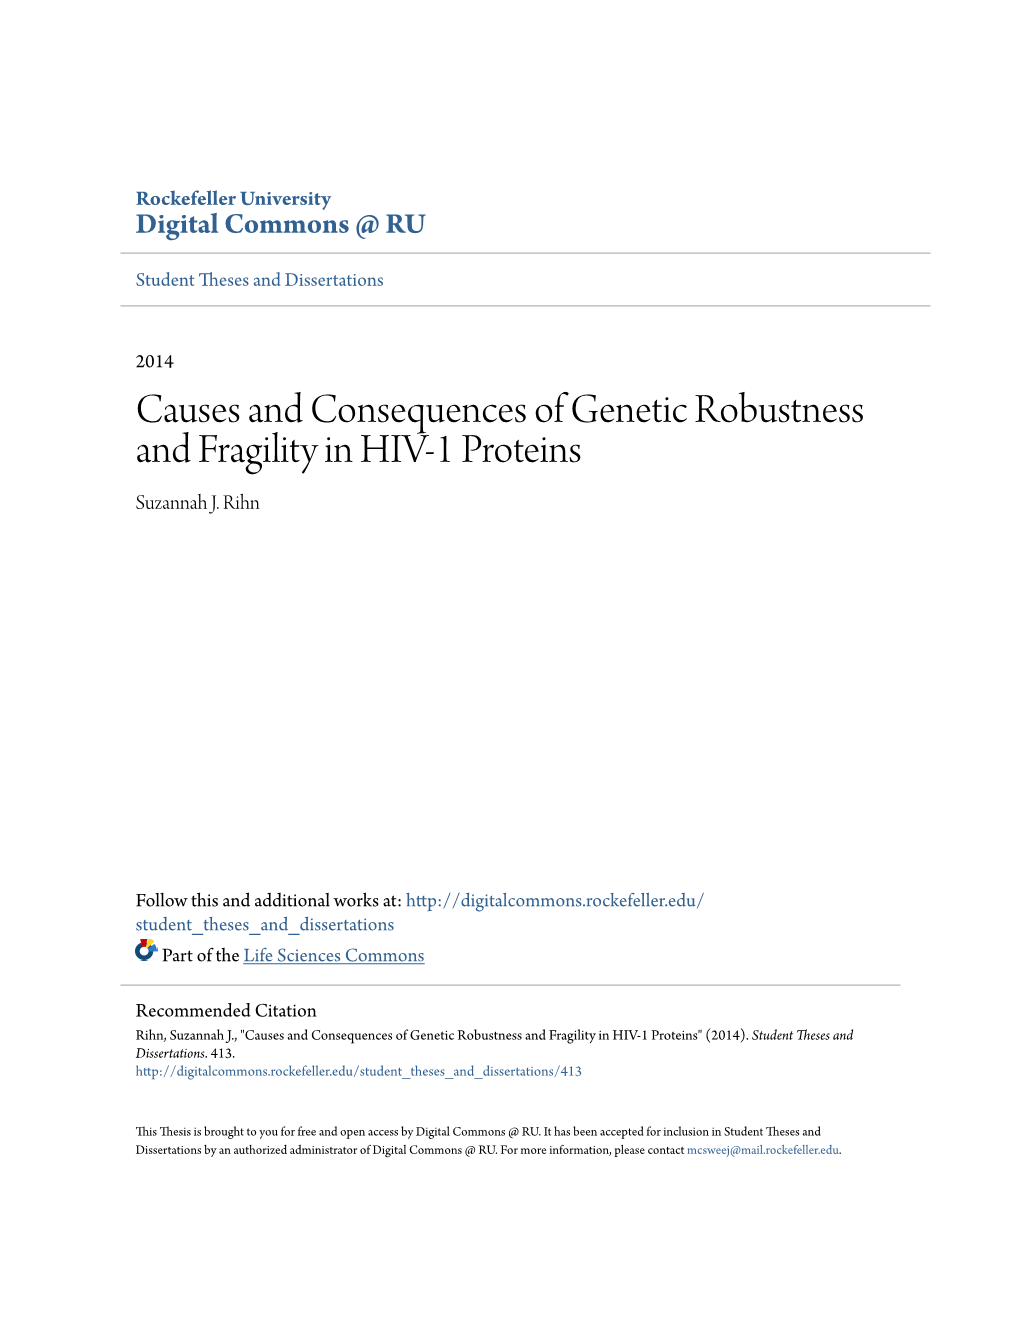 Causes and Consequences of Genetic Robustness and Fragility in HIV-1 Proteins Suzannah J